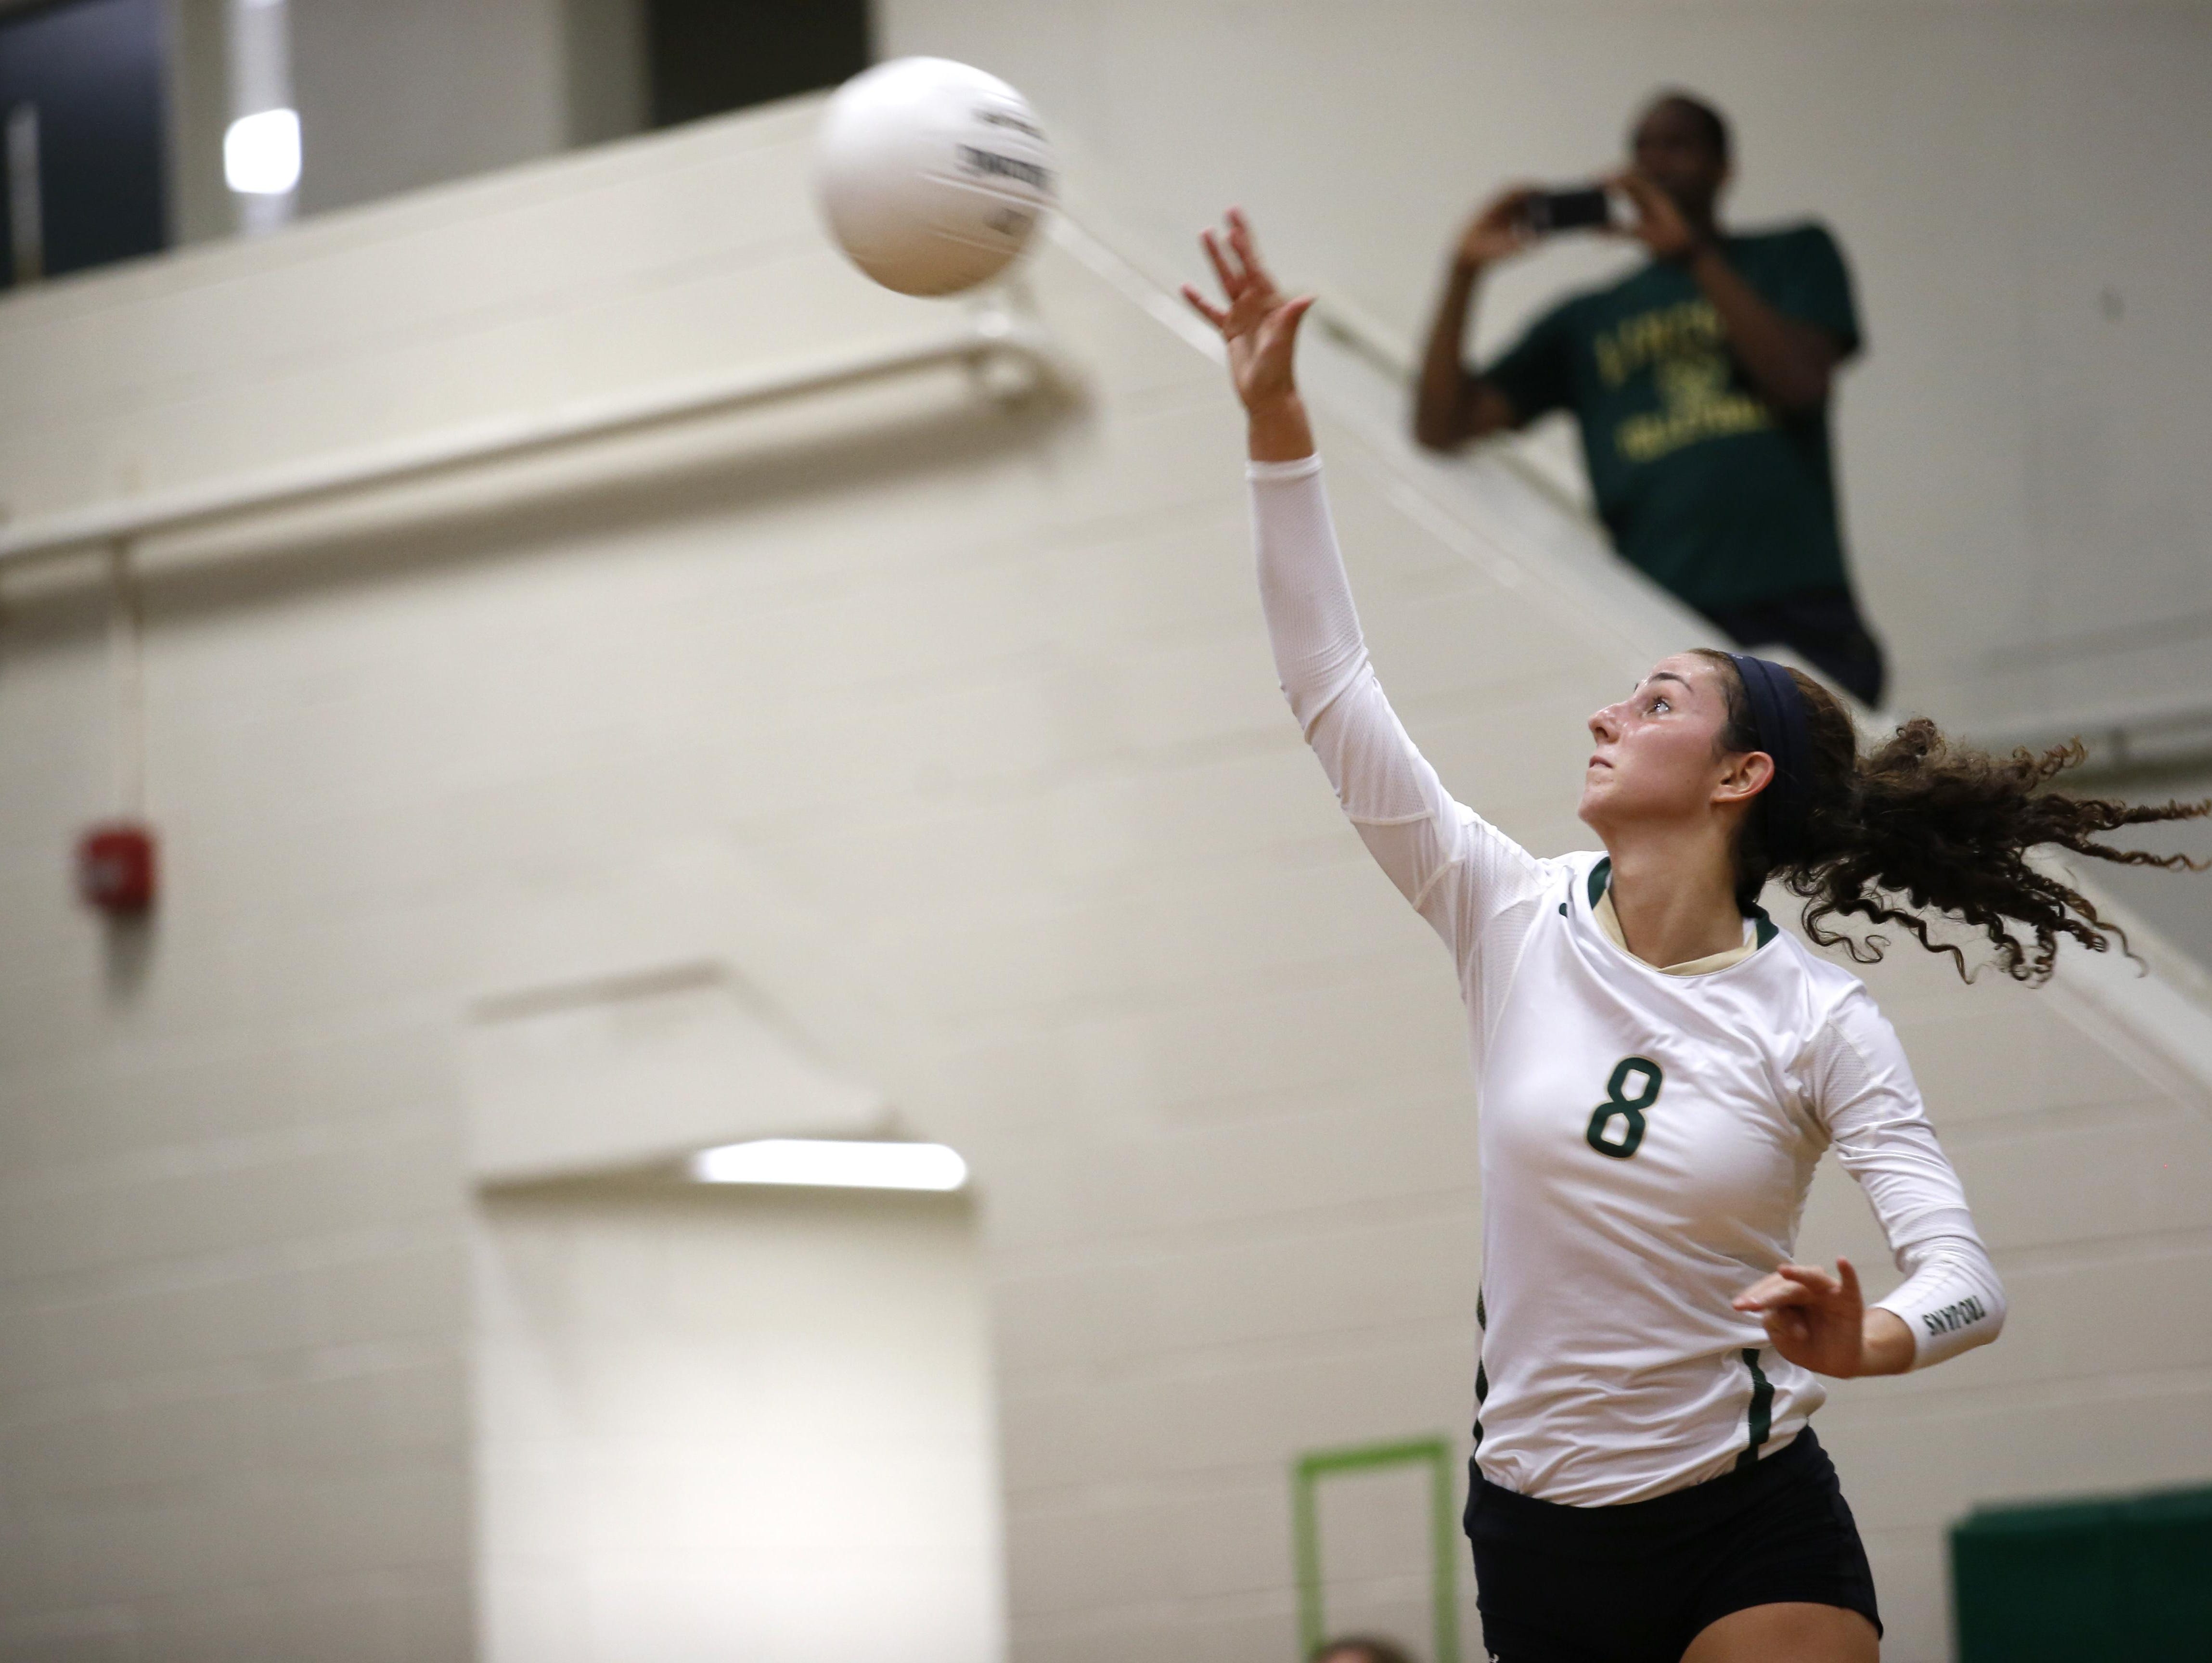 Lincoln junior Madison Fitzpatrick serves during the Trojans’ 3-1 loss to Leon on Tuesday. Fitzpatrick had 13 kills and 16 digs in the match.